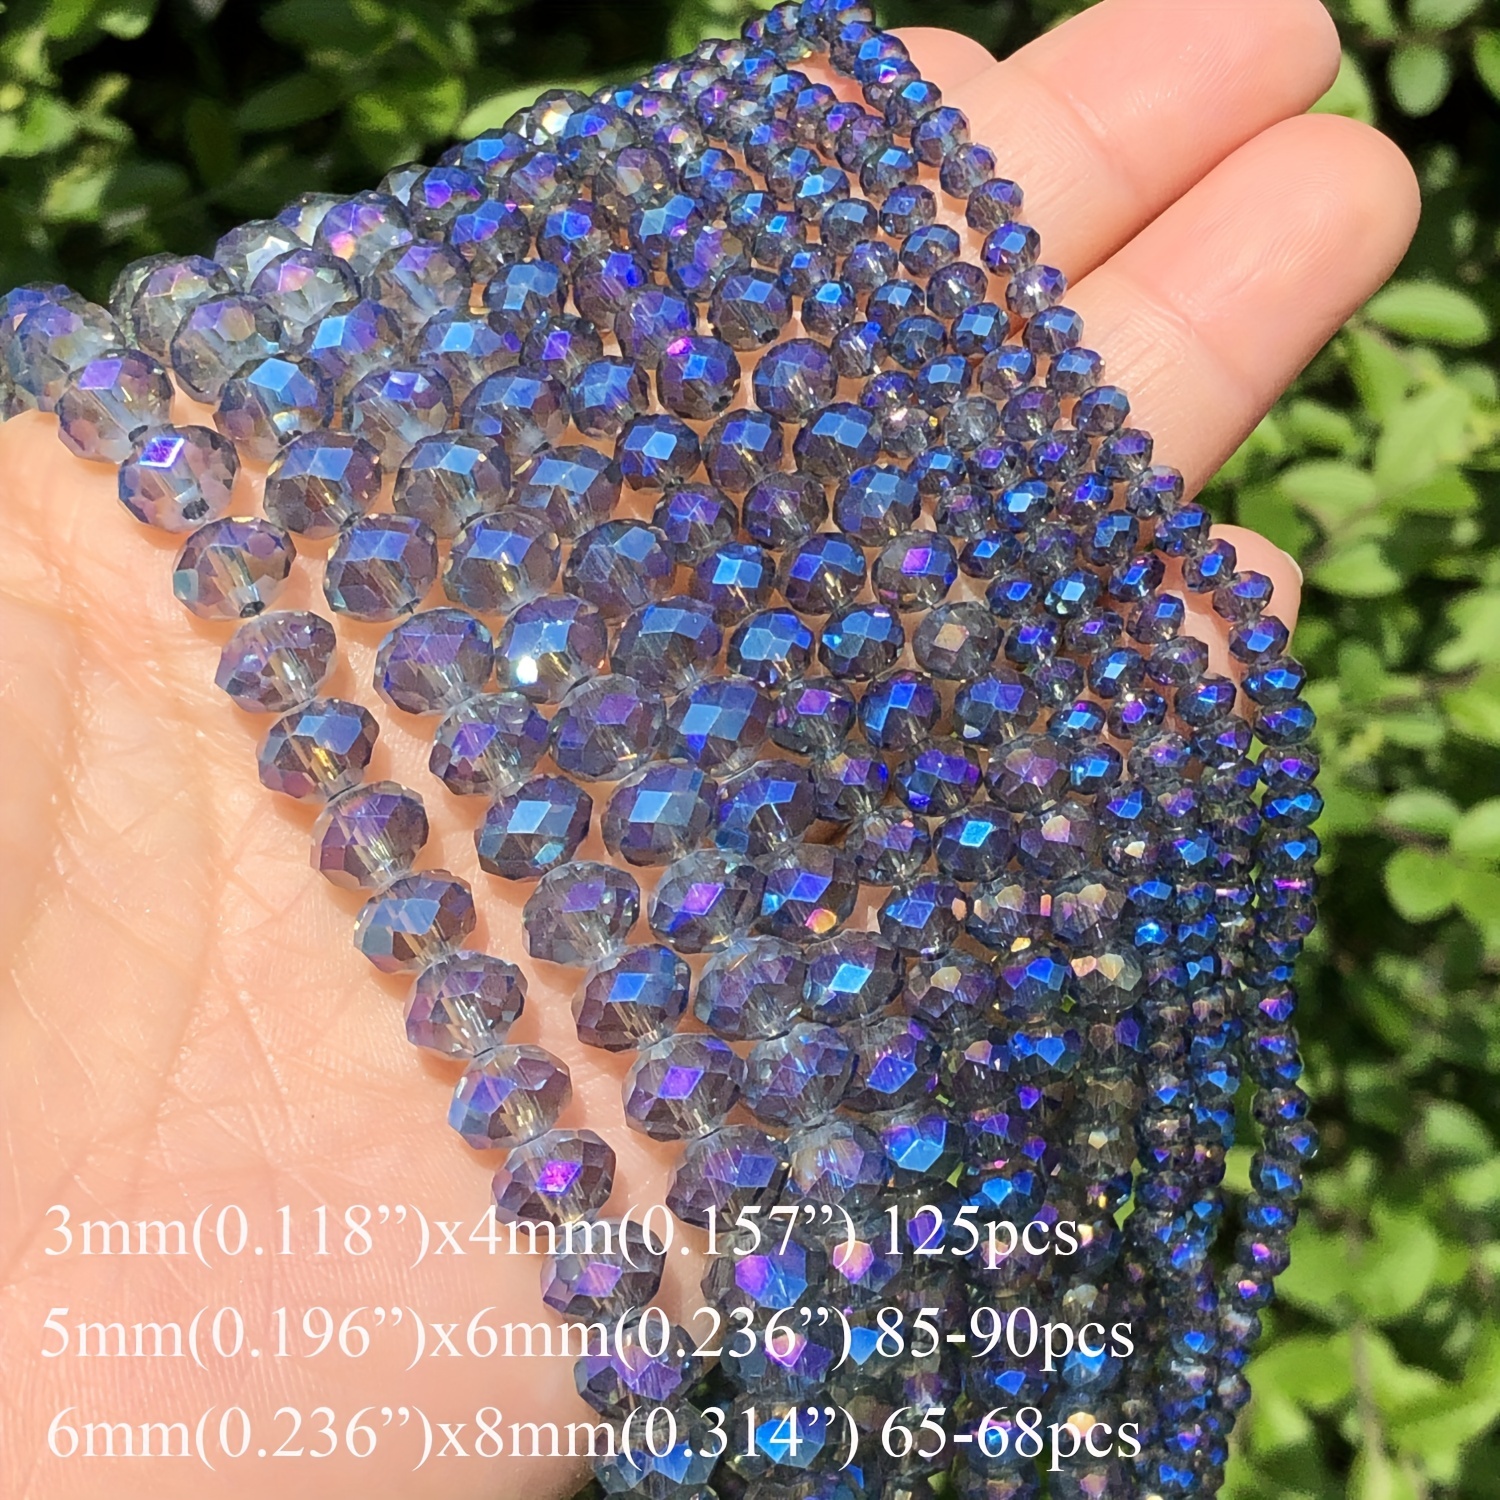 8mm Faceted Glass Beads Blue, Glass Jewelry Accessories